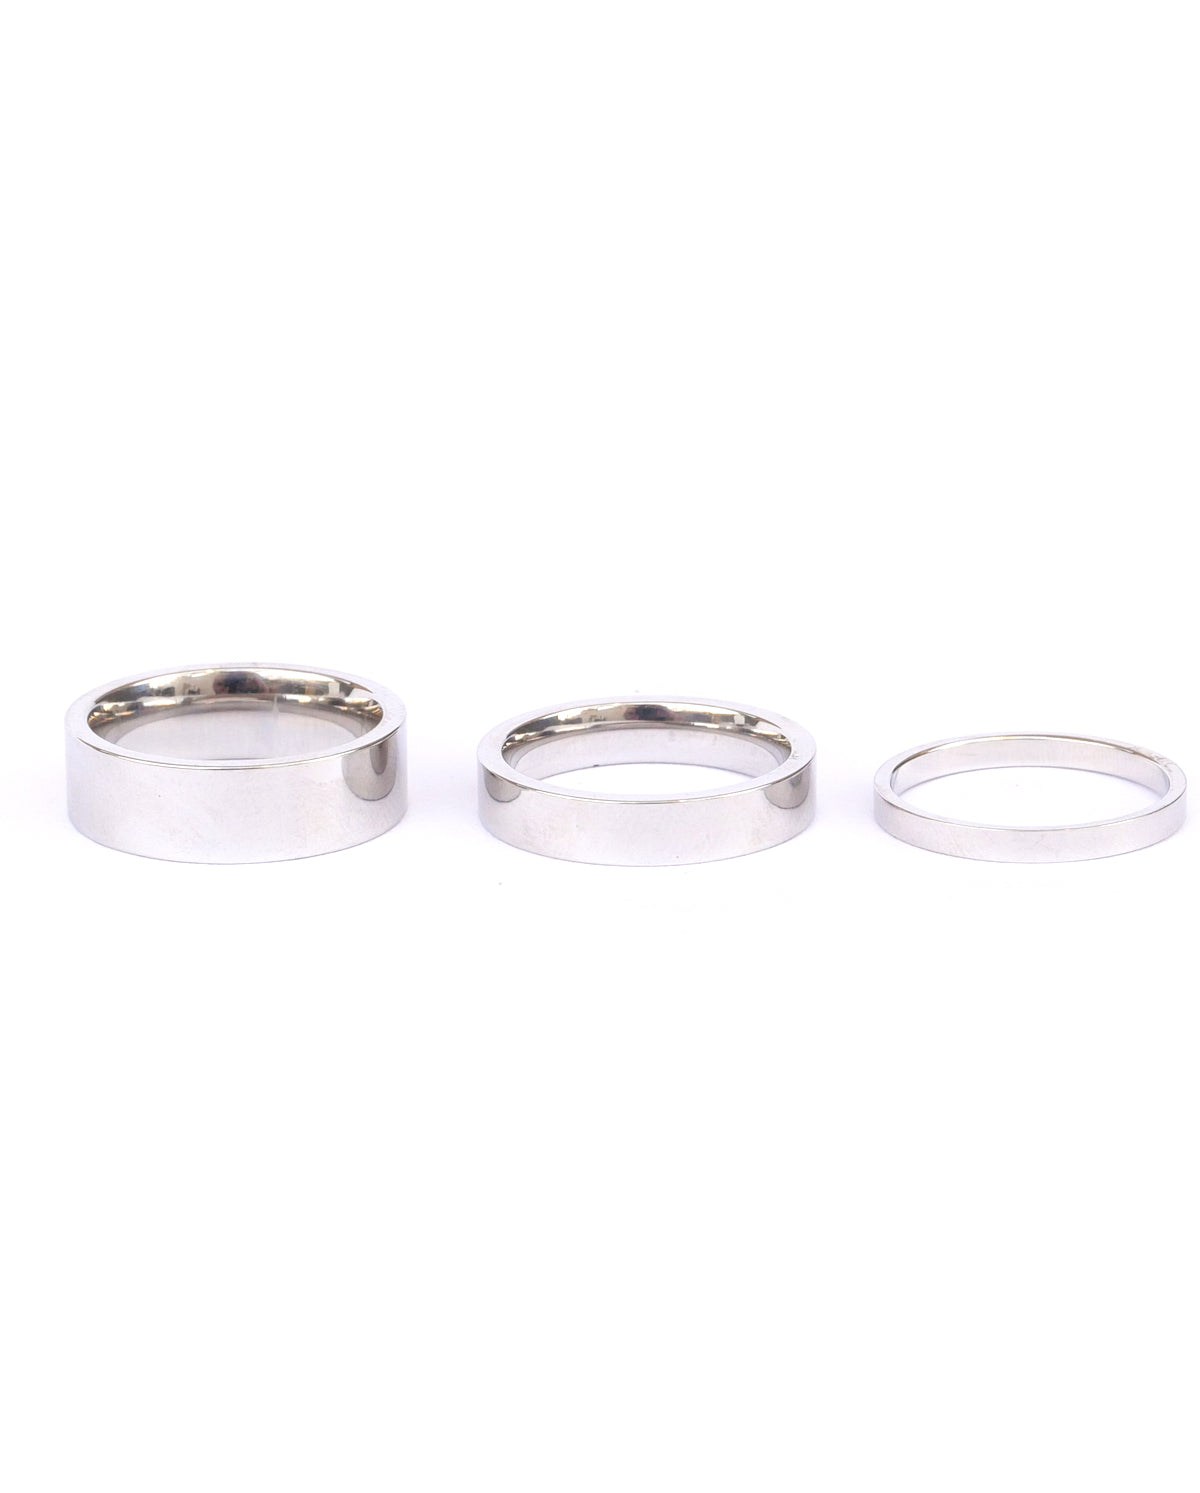 Silver banded Amor ring set on a white backdrop showing different widths of rings